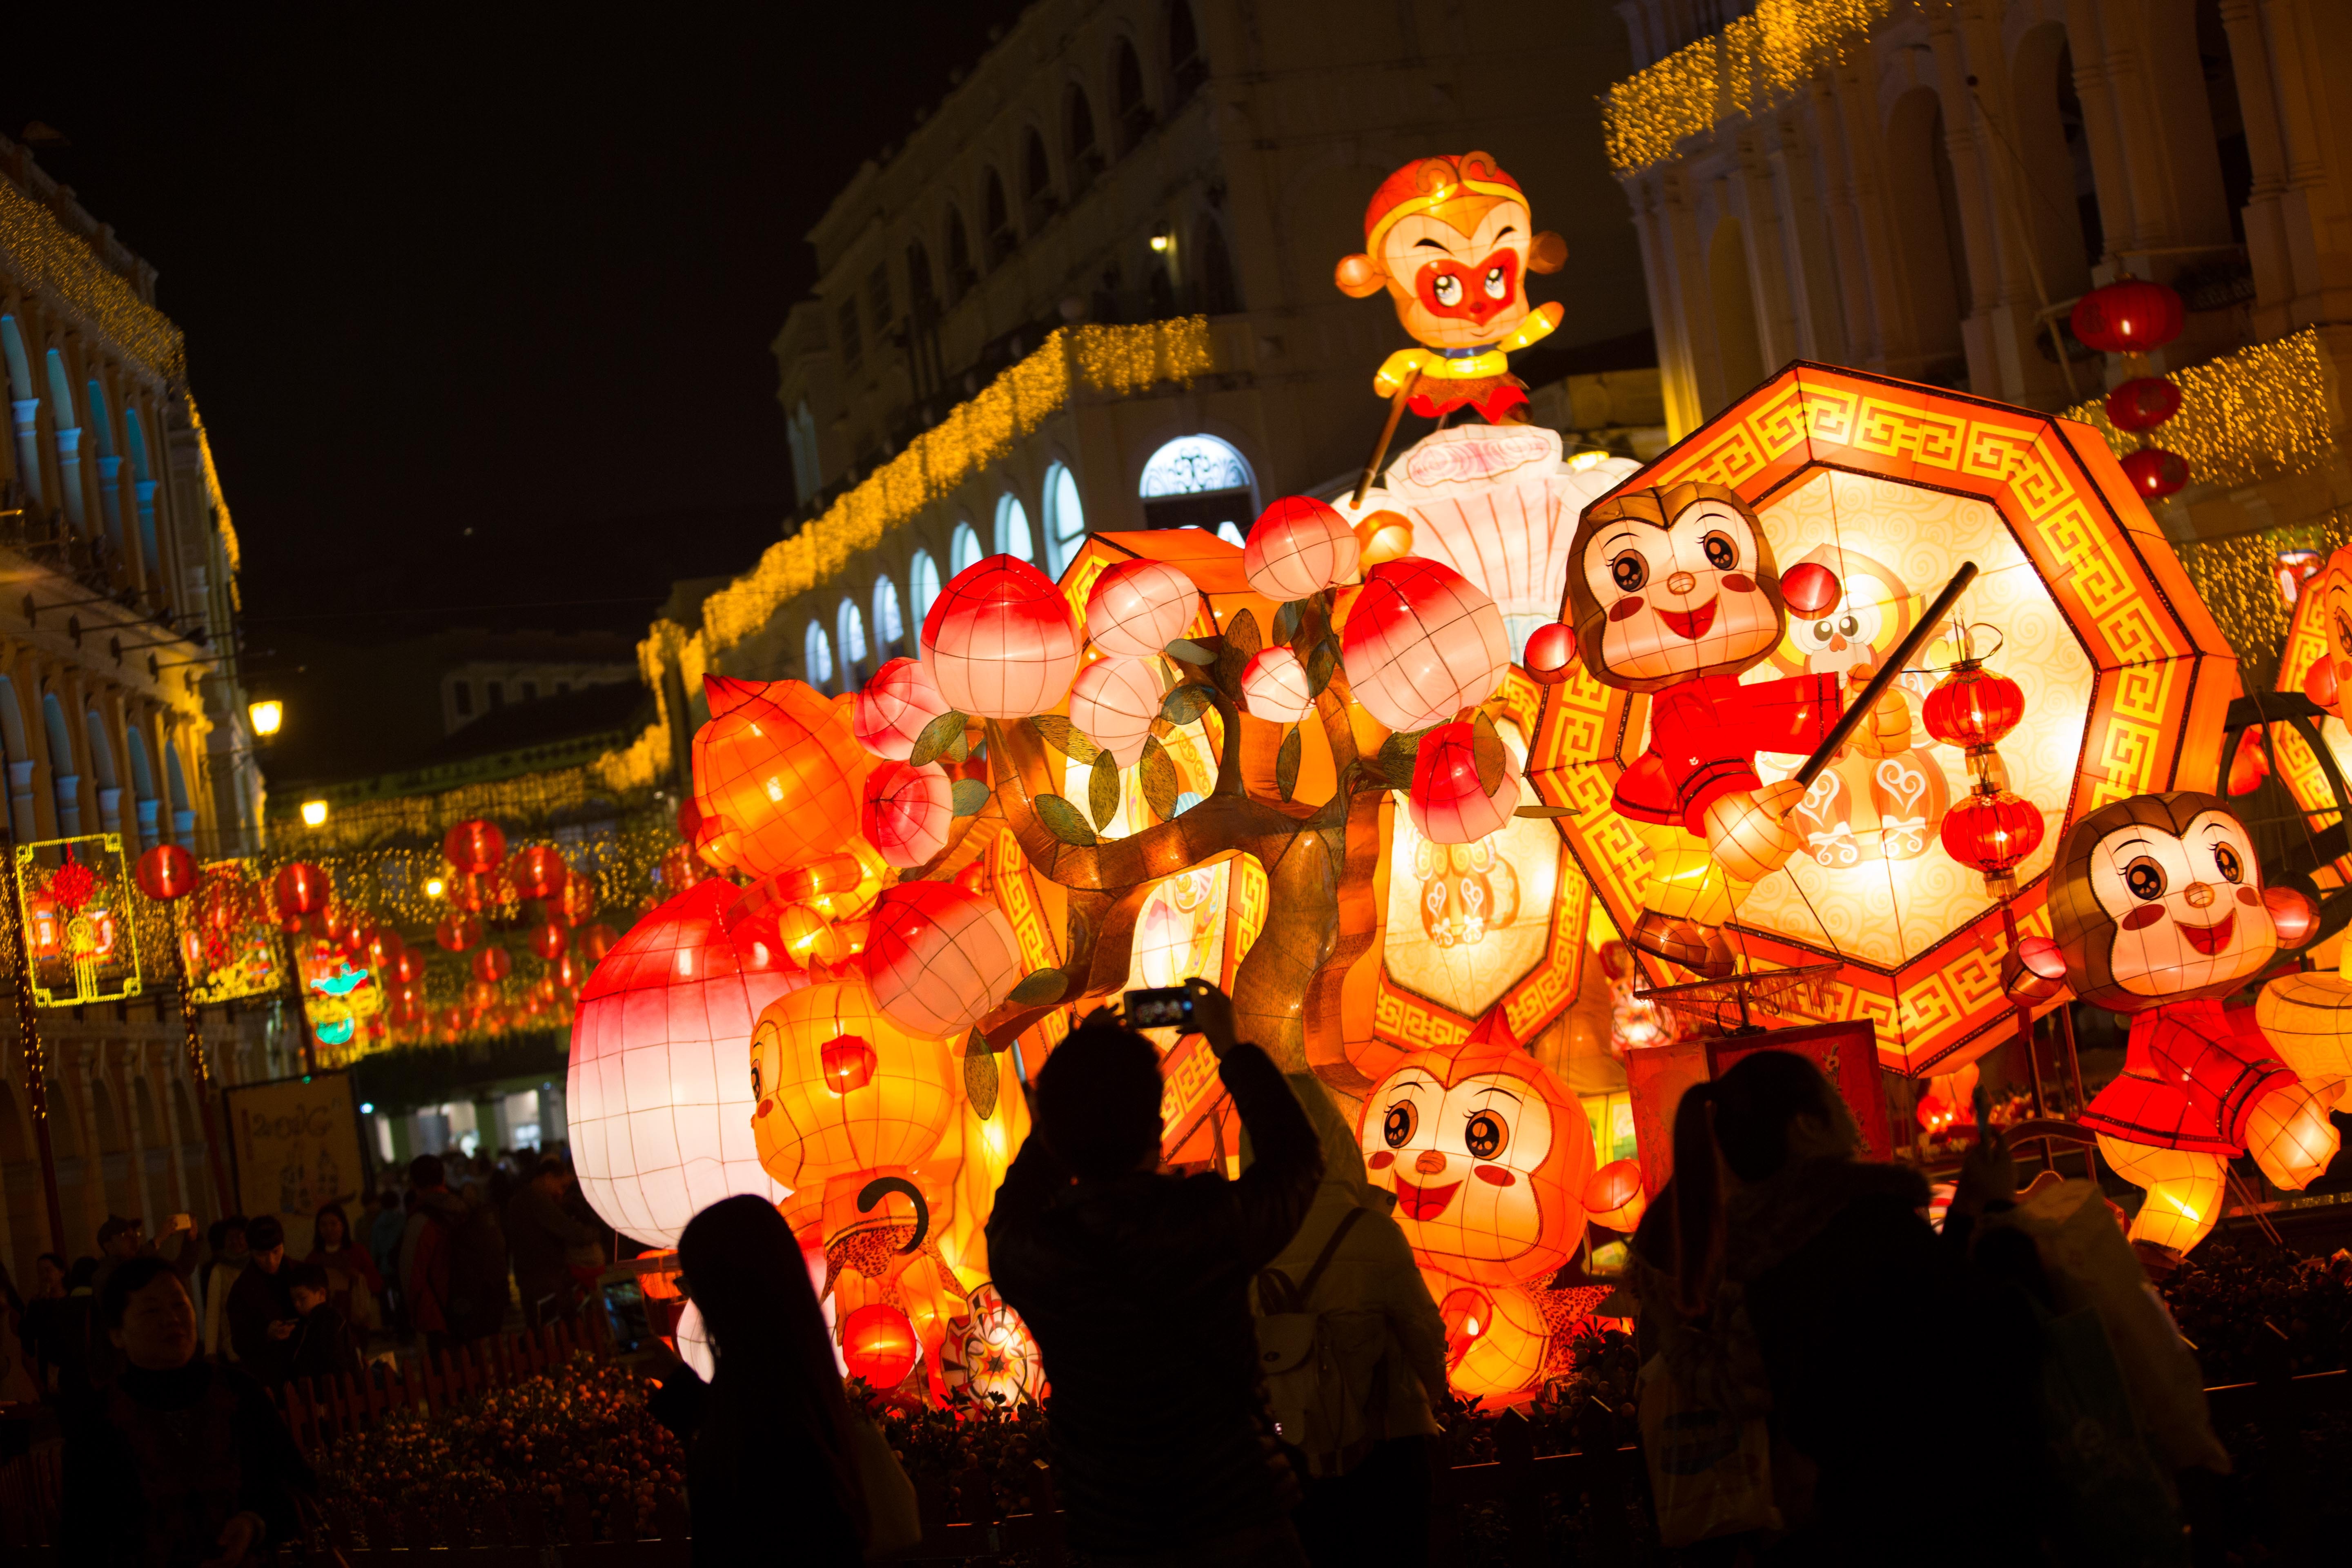 (160130) -- MACAO, Jan. 30, 2016 (Xinhua) -- People view lanterns themed on monkeys to greet the upcoming Spring Festival in Macao, south China, on Jan. 29, 2016. The Spring Festival, or the Chinese Lunar New Year, will fall on February 8 this year. According to Chinese zodiac, 2016 is the Year of the Monkey. (Xinhua/Cheong Kam Ka) (zx)